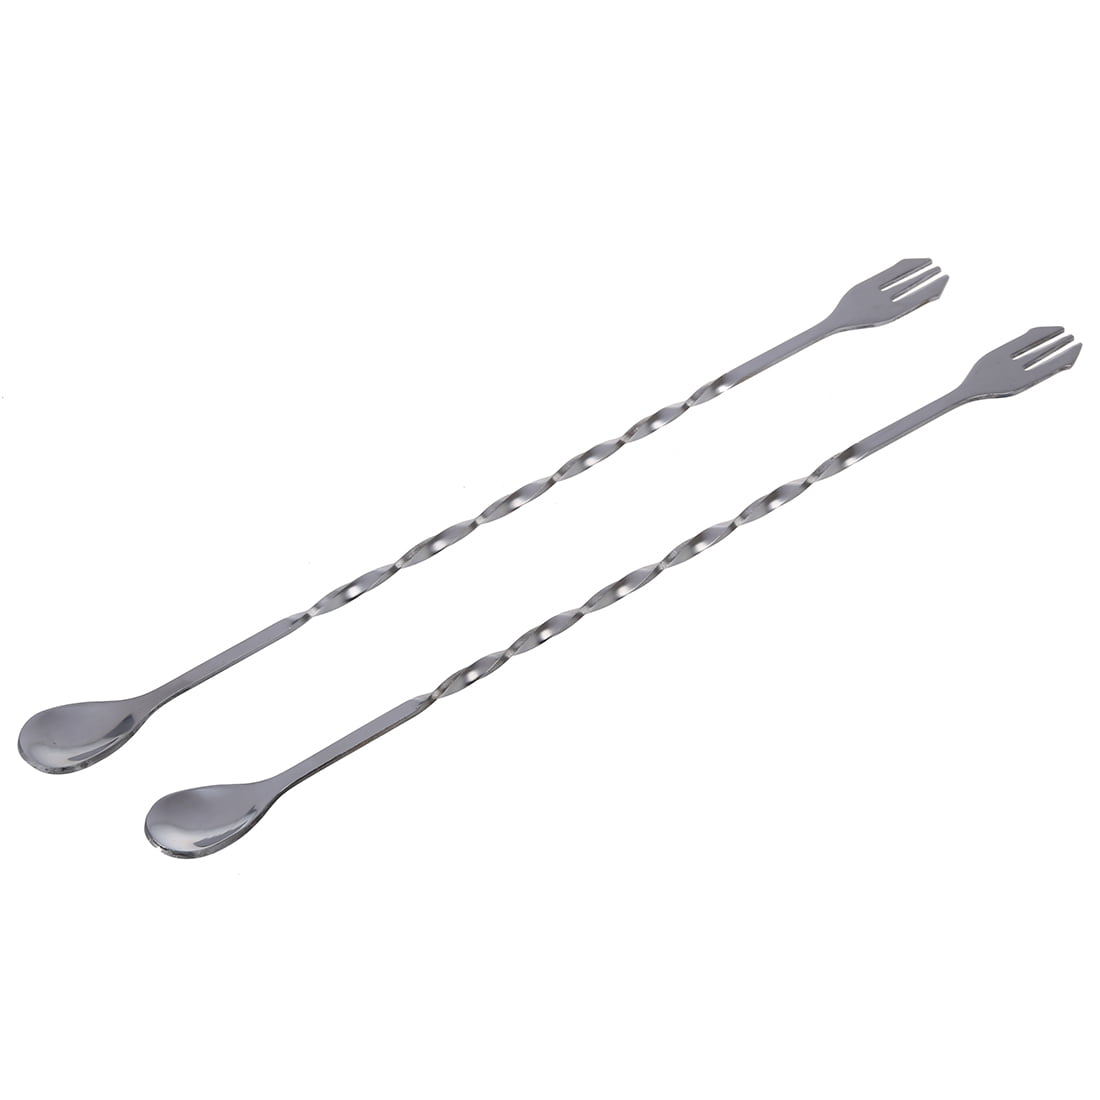 2pcs New Stainless Steel Bar Cocktail Twisted Mixing Spoon Fork DIY Set 